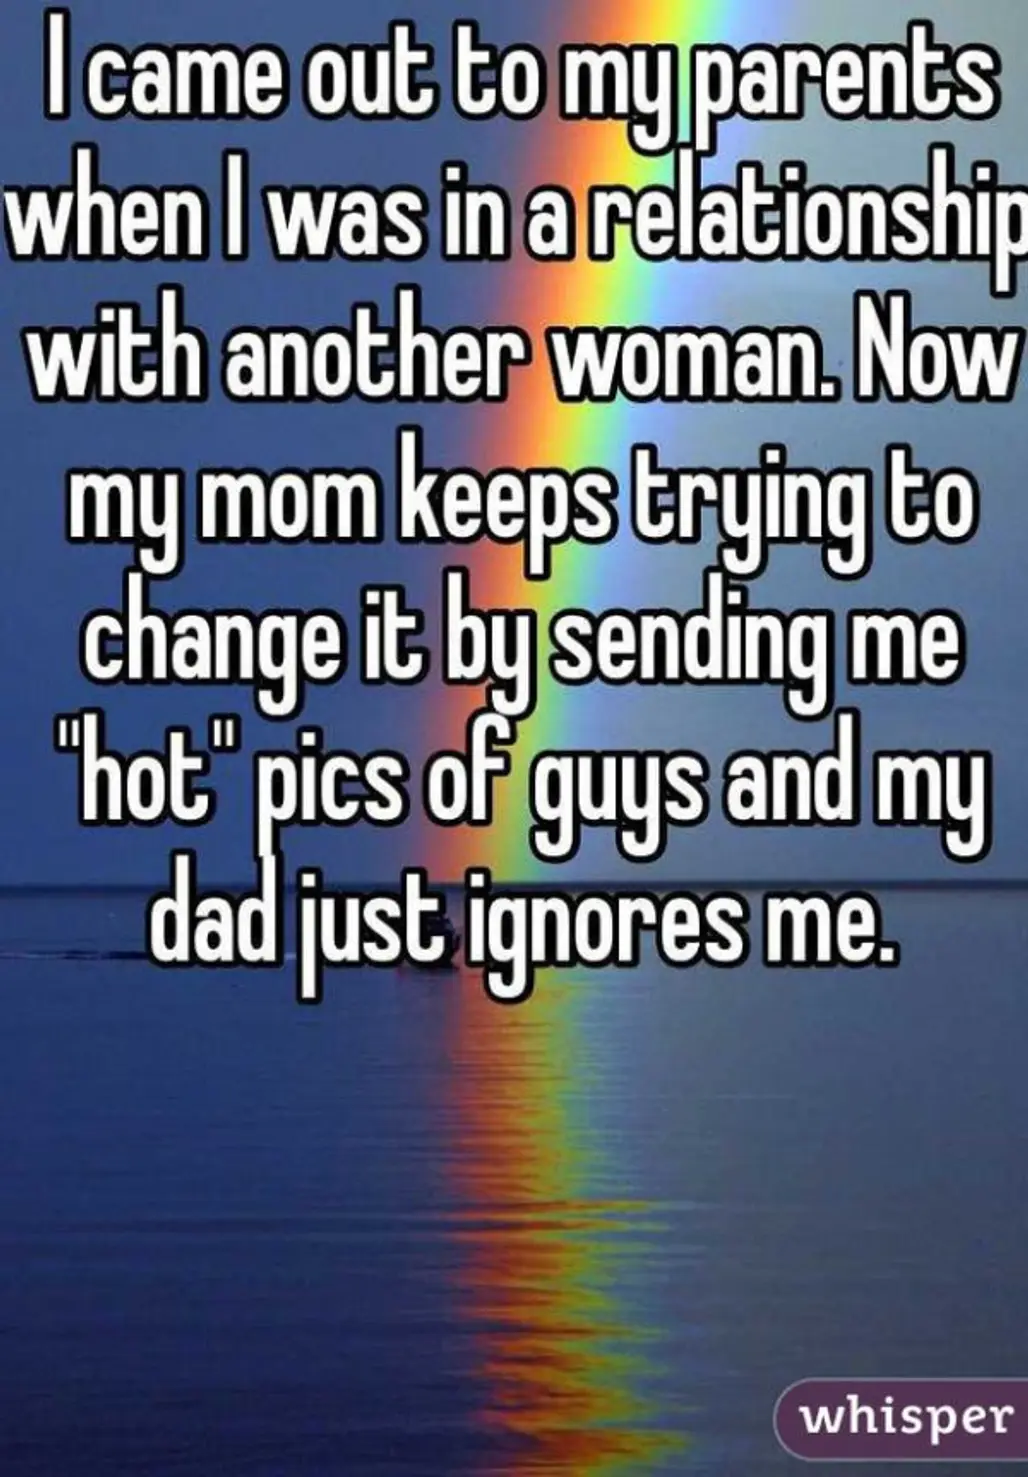 You Shouldn't Try to Change Someone if They do Come out to You